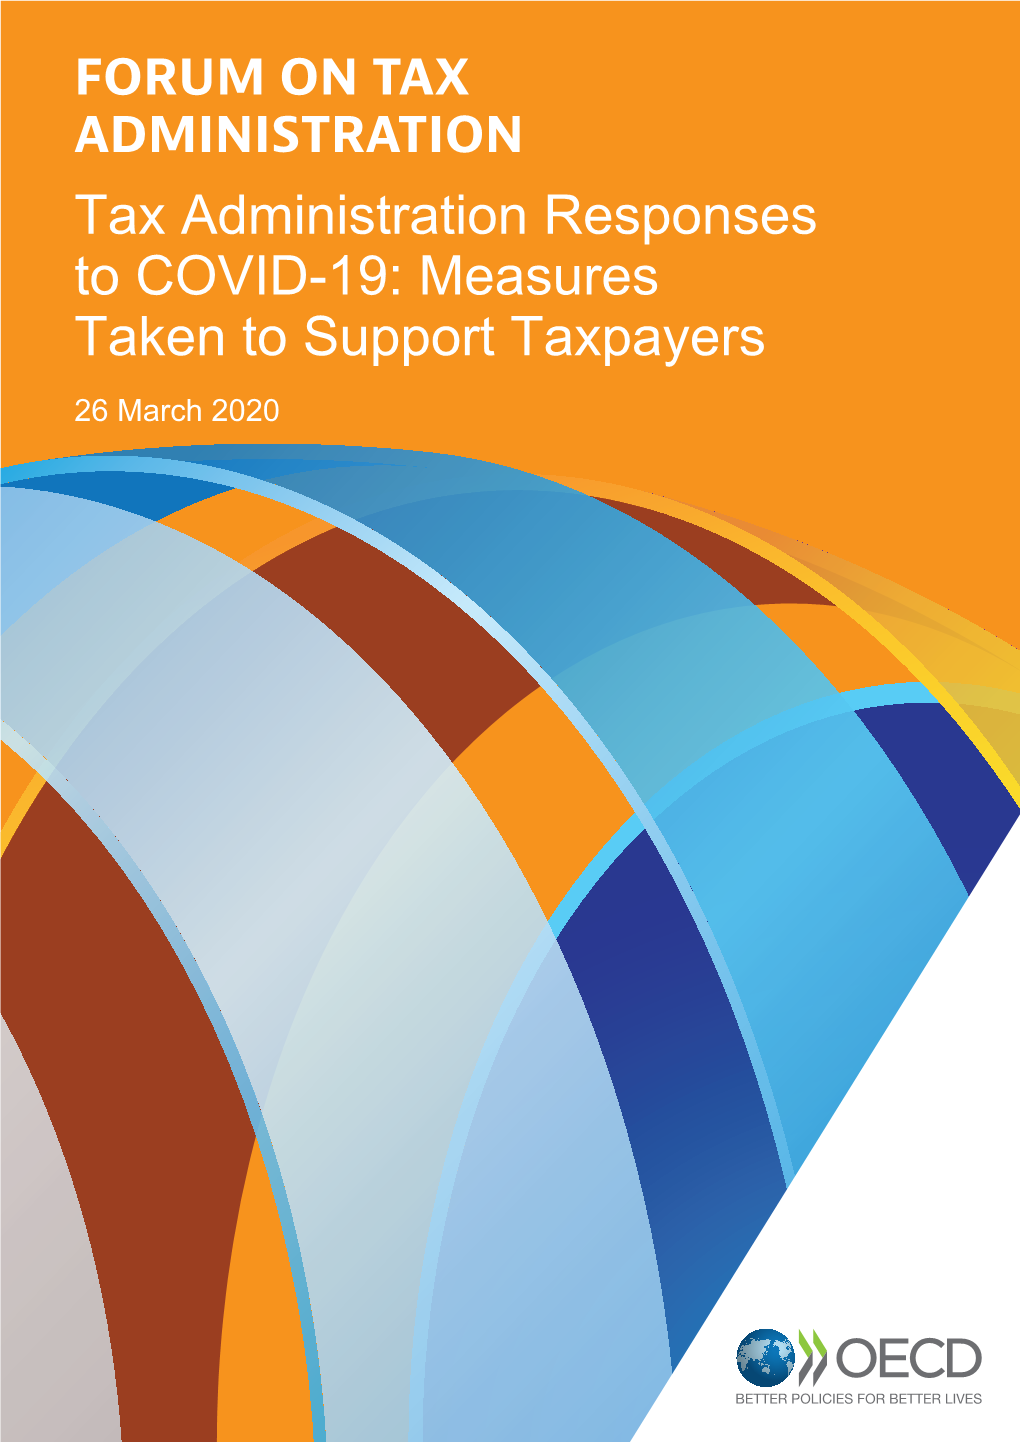 Tax Administration Responses to COVID-19: Measures Taken